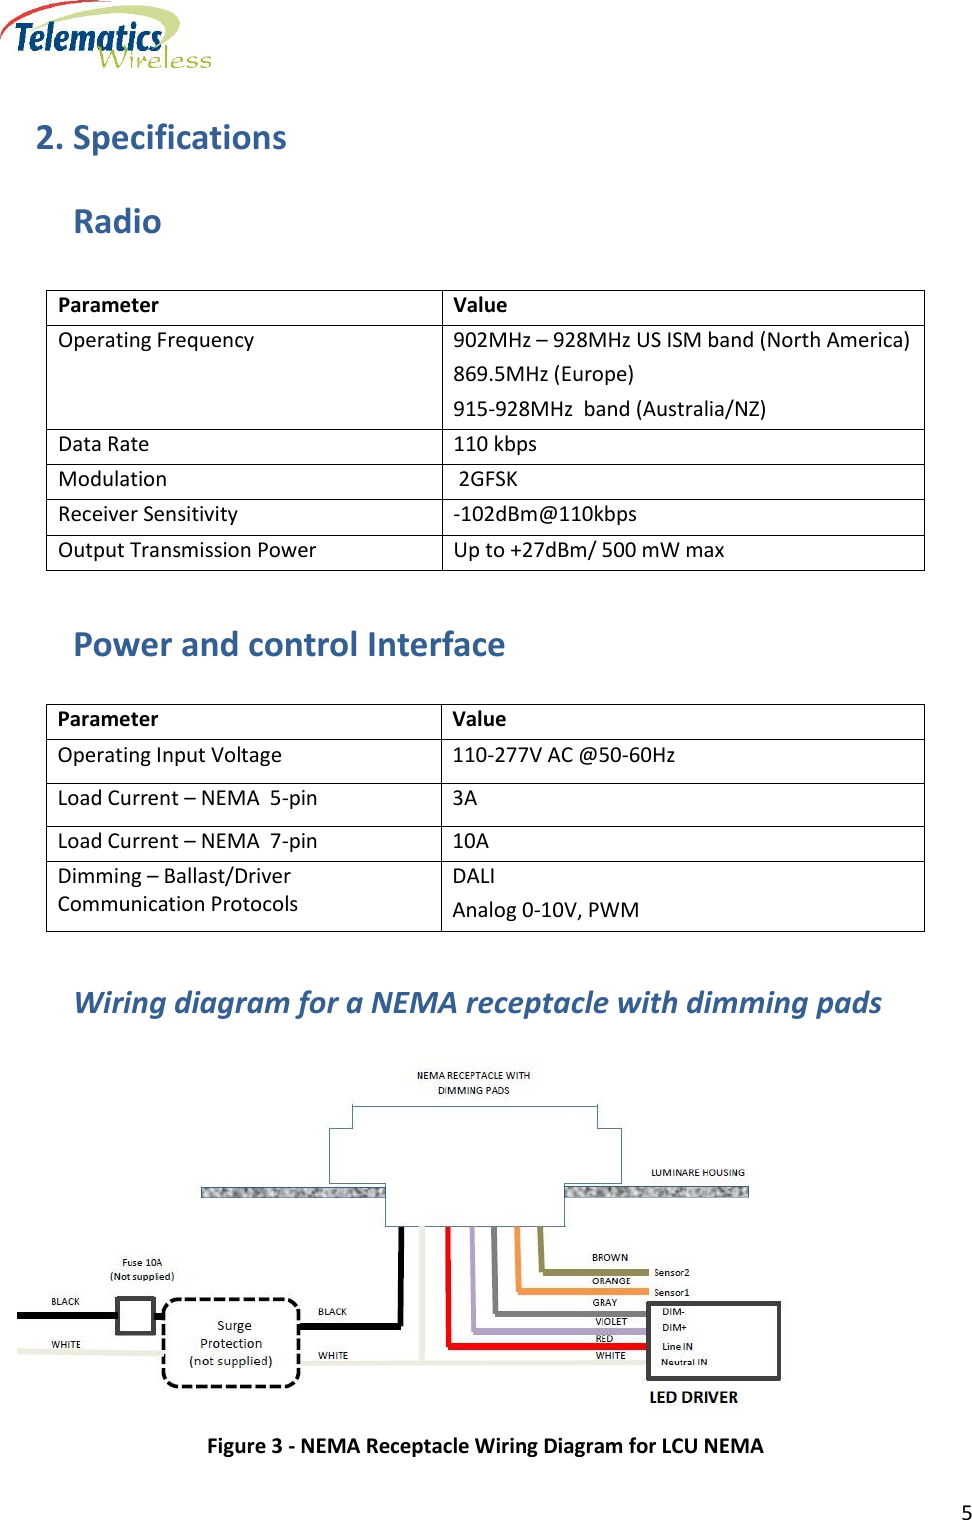      5  2. Specifications Radio Power and control Interface Parameter Value Operating Input Voltage 110-277V AC @50-60Hz  Load Current – NEMA  5-pin 3A Load Current – NEMA  7-pin 10A Dimming – Ballast/Driver Communication Protocols DALI Analog 0-10V, PWM Wiring diagram for a NEMA receptacle with dimming pads  Figure 3 - NEMA Receptacle Wiring Diagram for LCU NEMA Parameter Value Operating Frequency 902MHz – 928MHz US ISM band (North America) 869.5MHz (Europe) 915-928MHz  band (Australia/NZ) Data Rate 110 kbps Modulation  2GFSK Receiver Sensitivity  -102dBm@110kbps Output Transmission Power  Up to +27dBm/ 500 mW max 